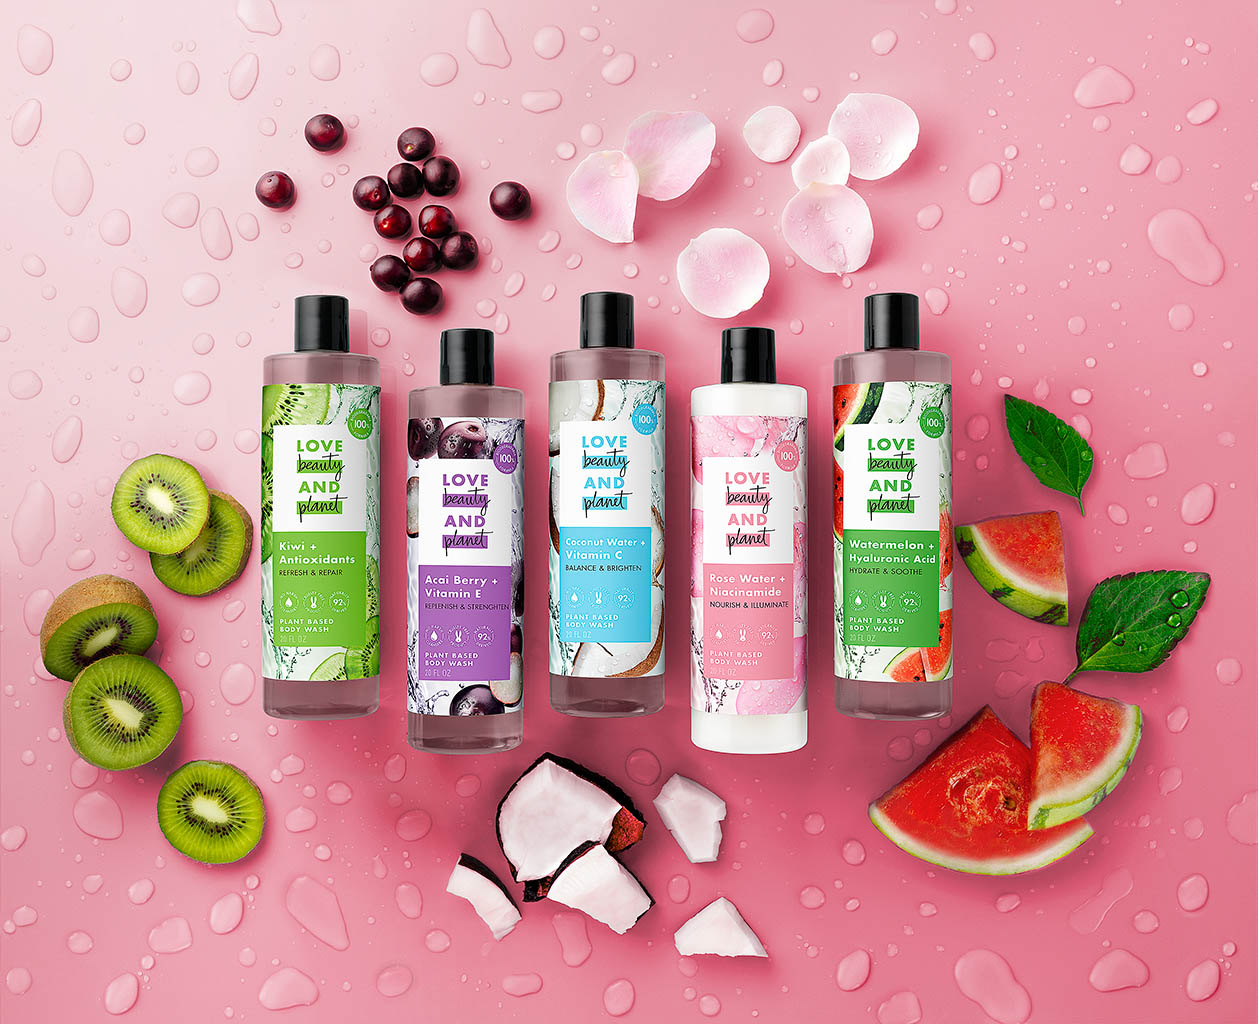 Packshot Factory - Coloured background - Love Beauty and Planet hair care